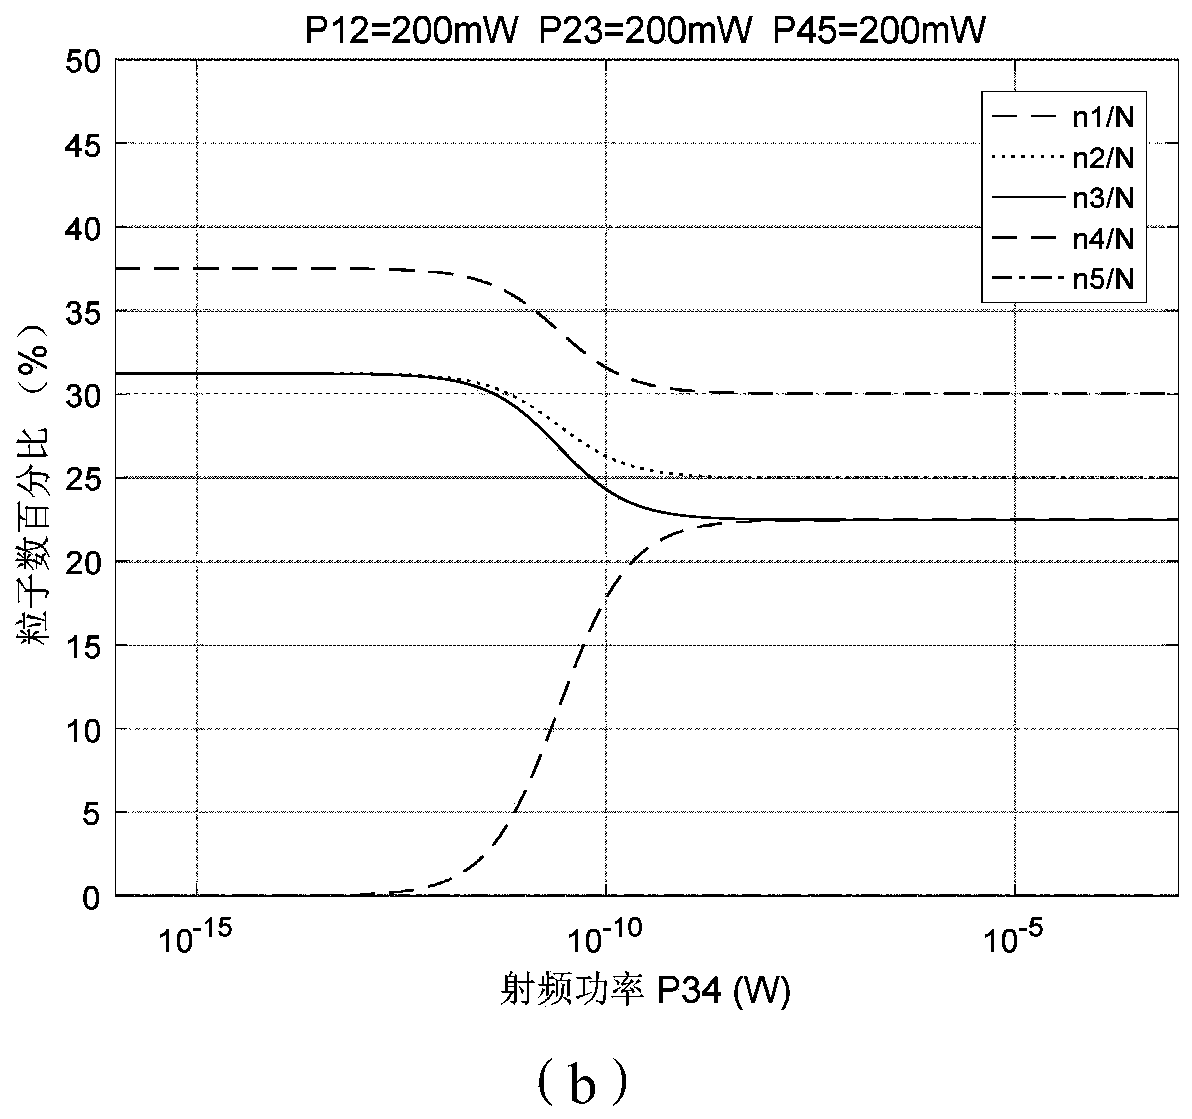 Design method of ultra-low noise radio frequency receiver based on Rydberg atomic transition